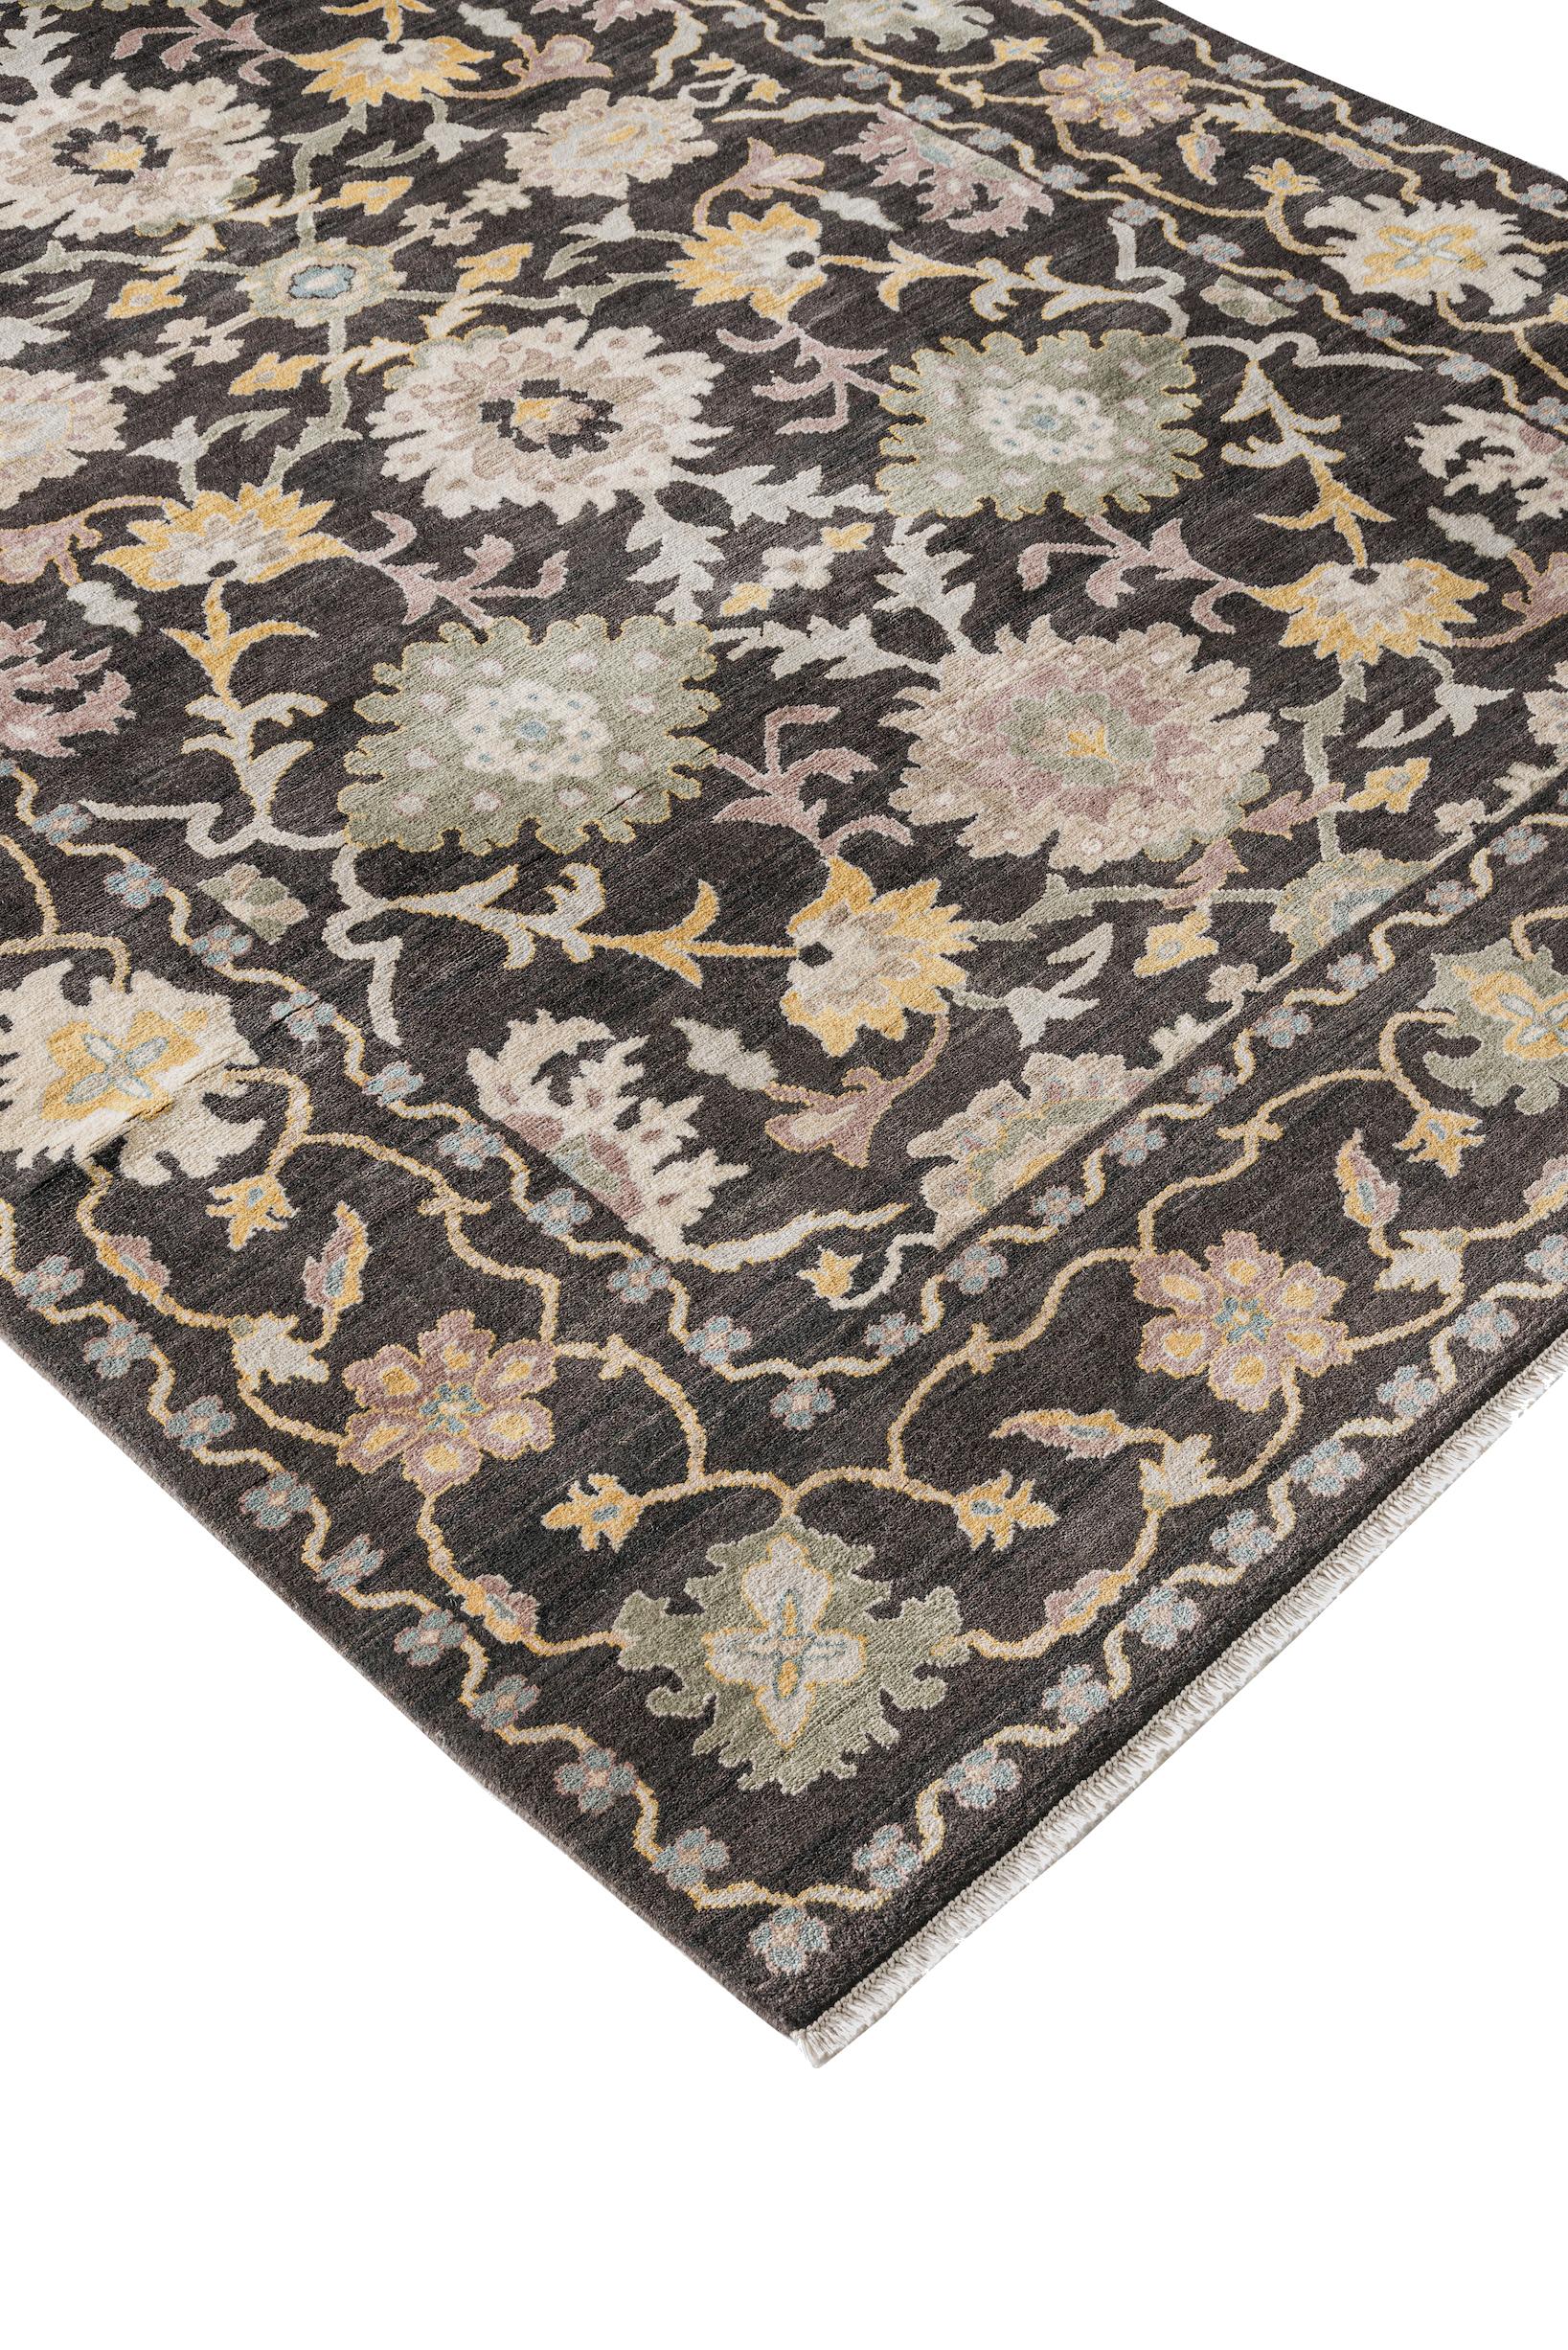 Art Nouveau 21st Century Hand-Knotted Egyptian Ziegler Rug in Charcoal Grey Floral Pattern For Sale